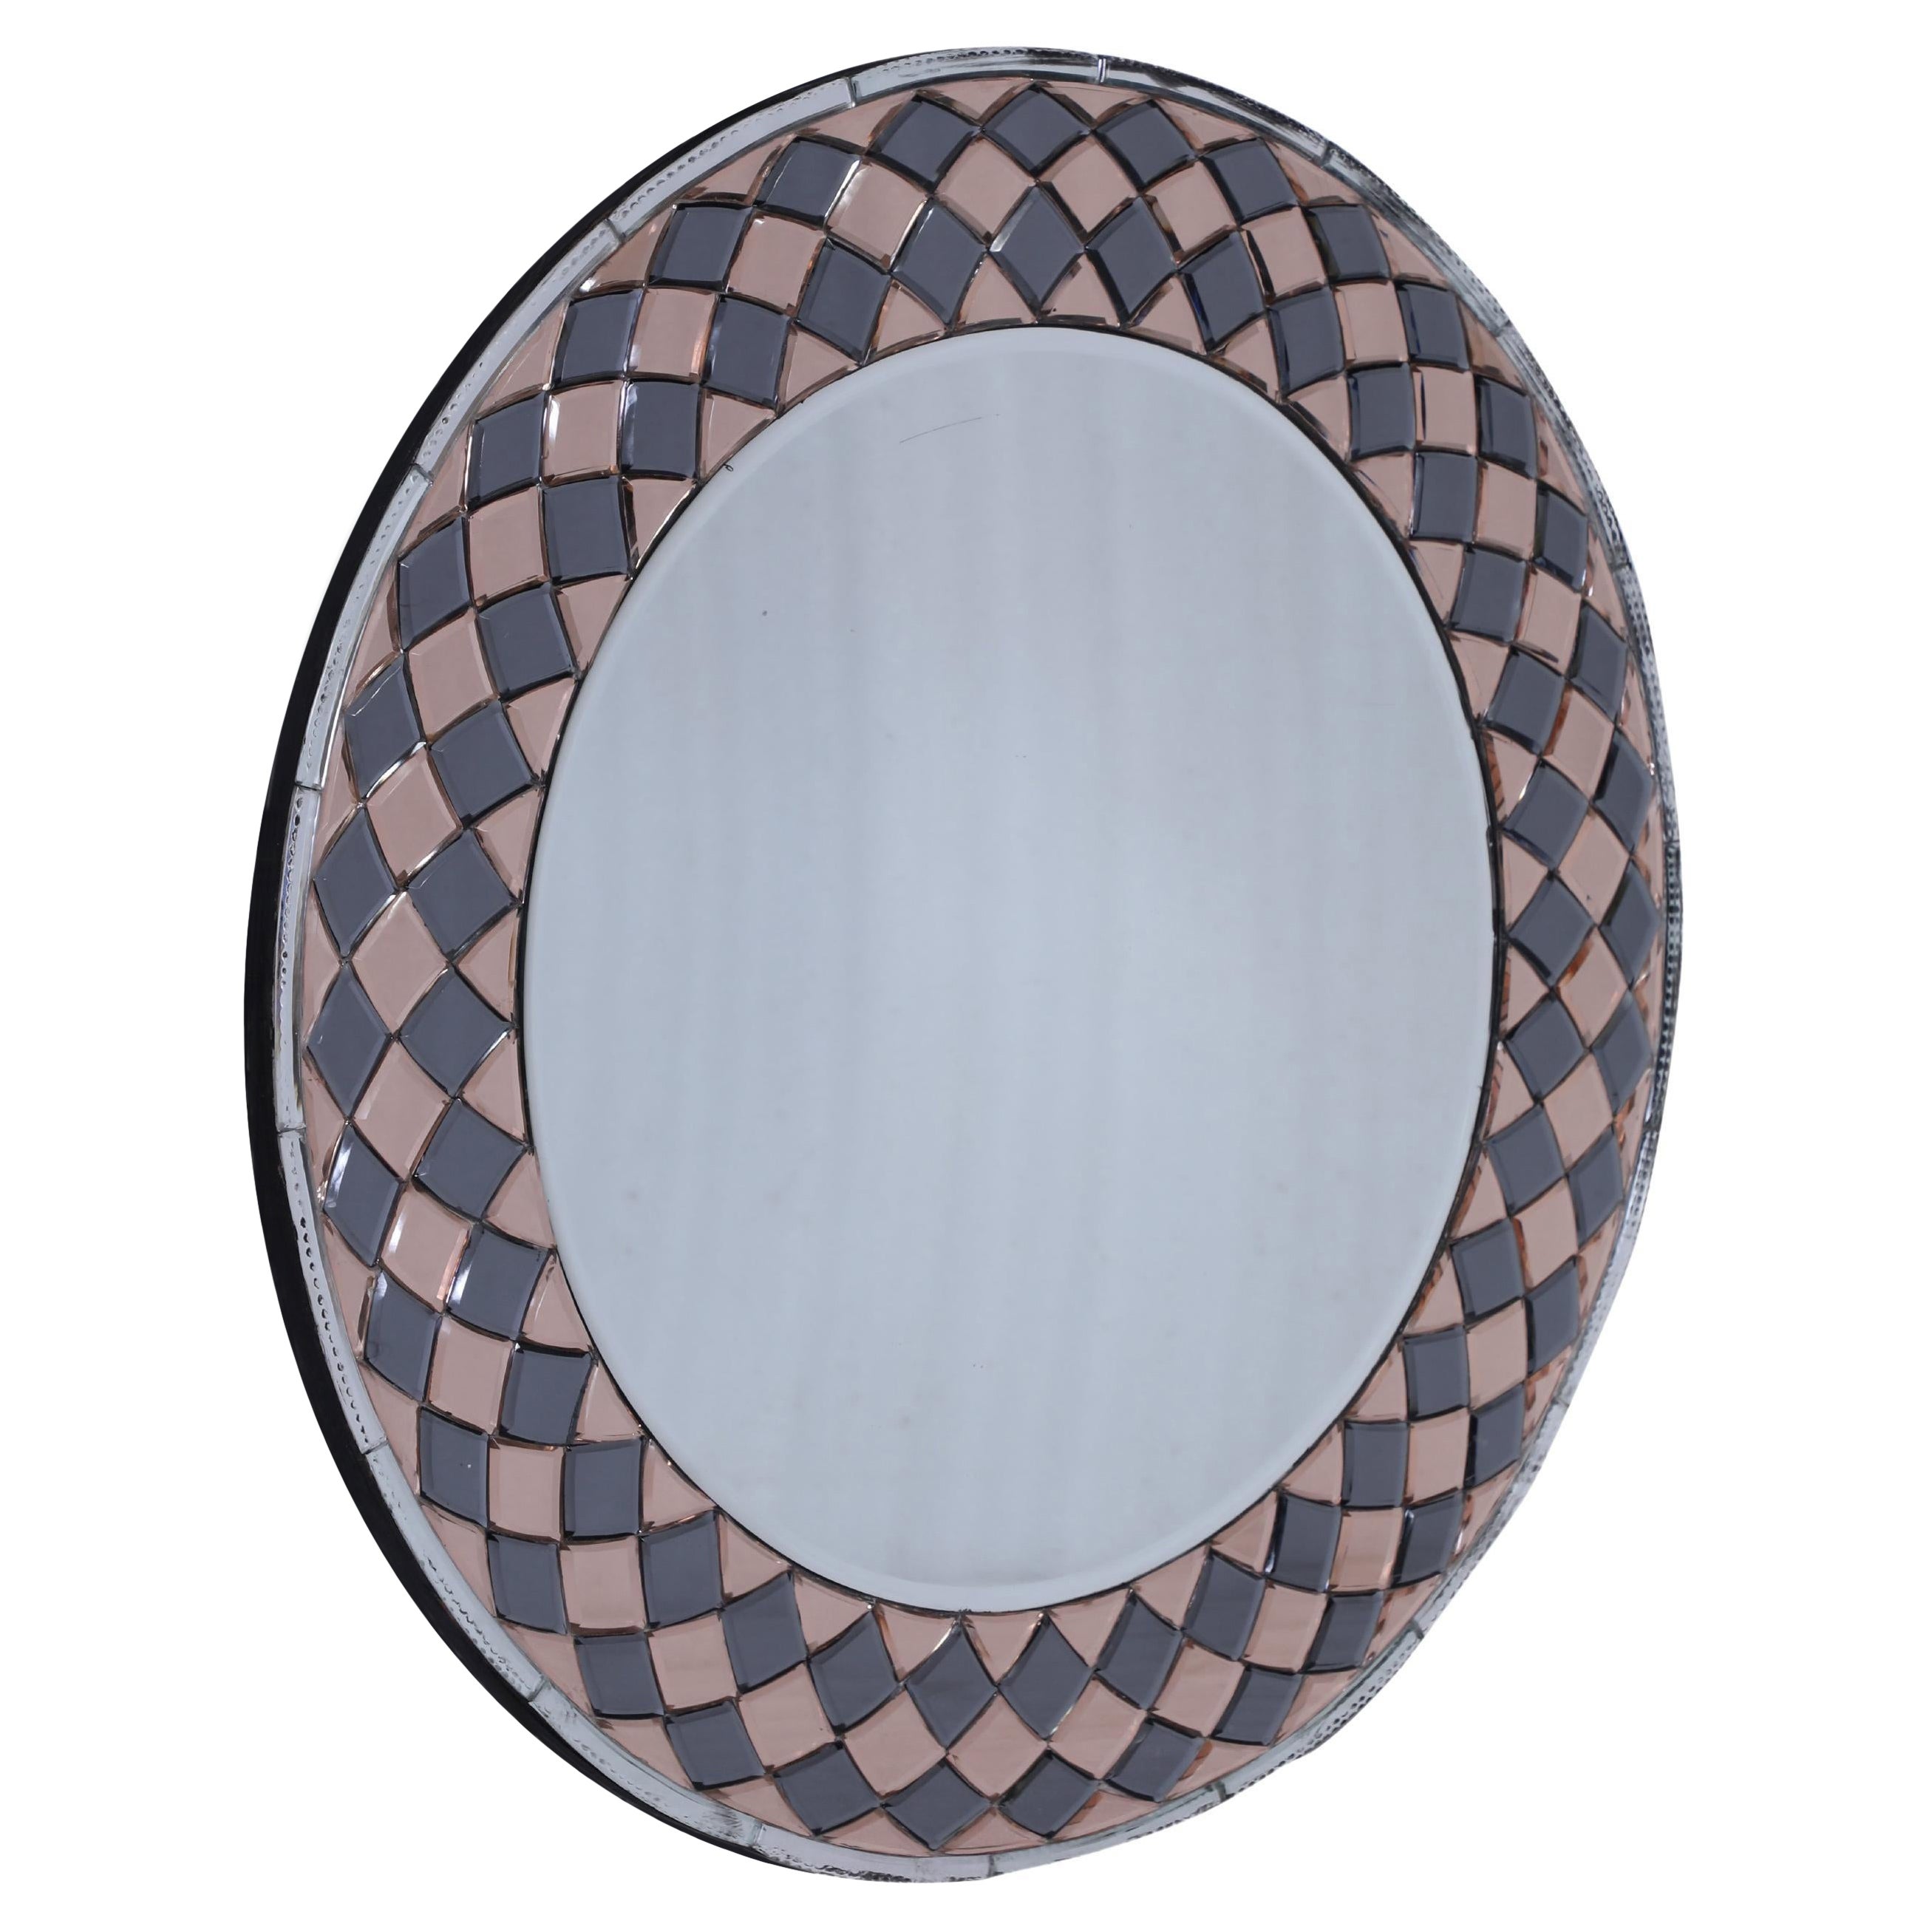 Rose and Smoked Glass Harlequin Design Round Mirror For Sale